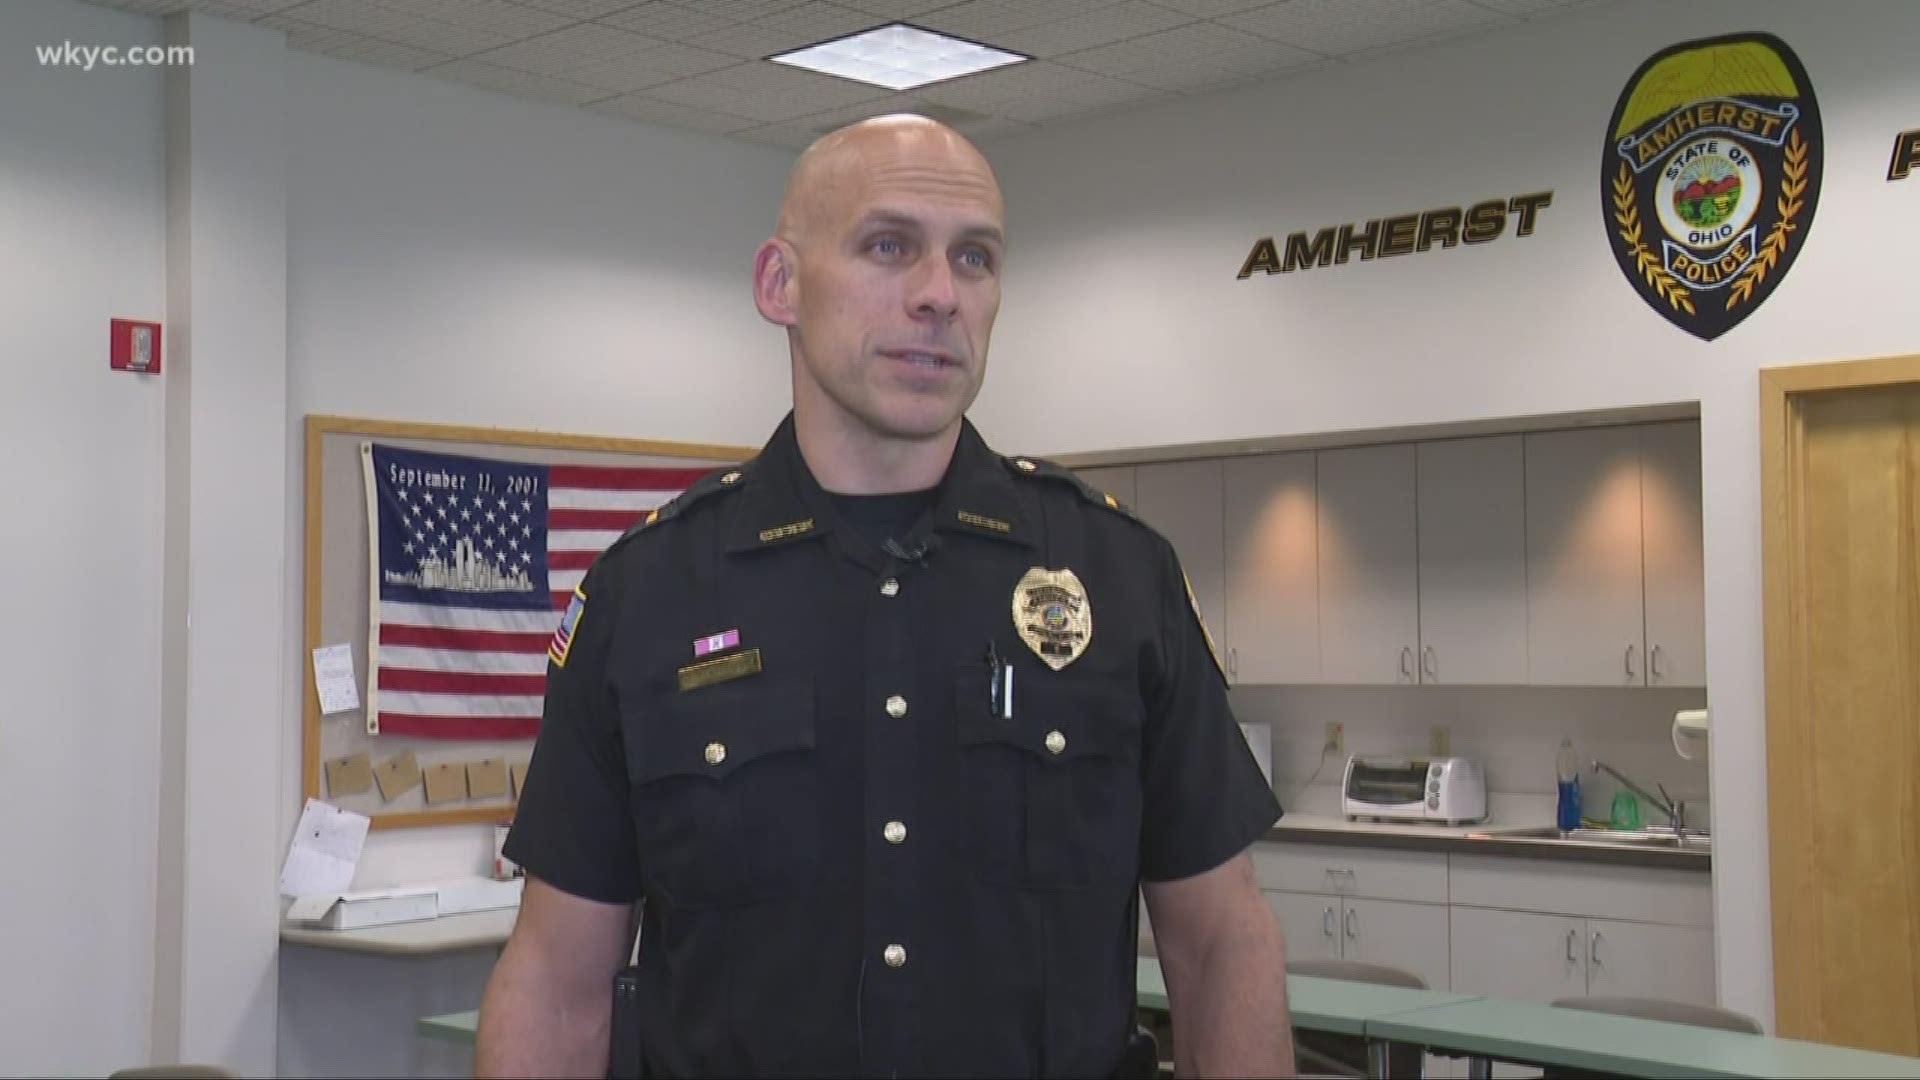 Burglars in several communities are teaming up. Amherst police say they will go door-to-door to warn residents about the increased threat.